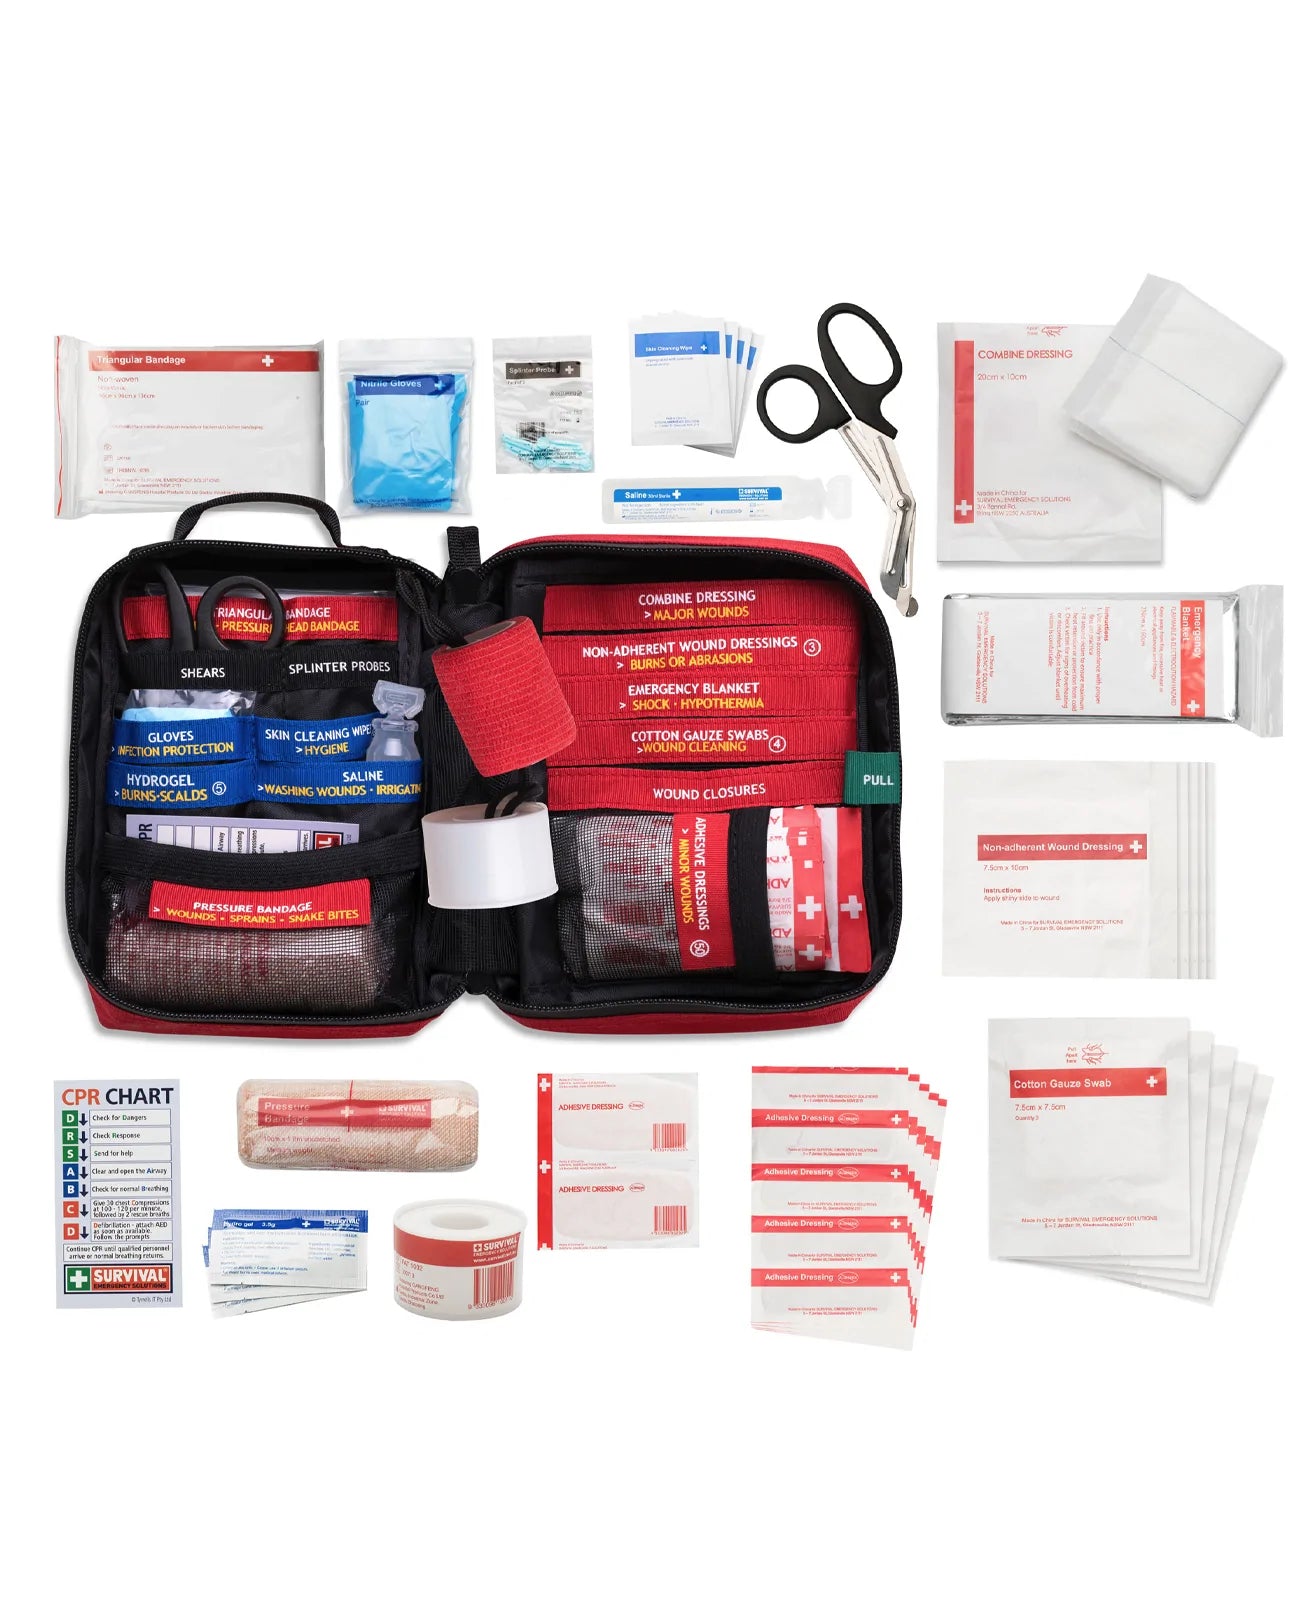 SURF FIRST AID KIT